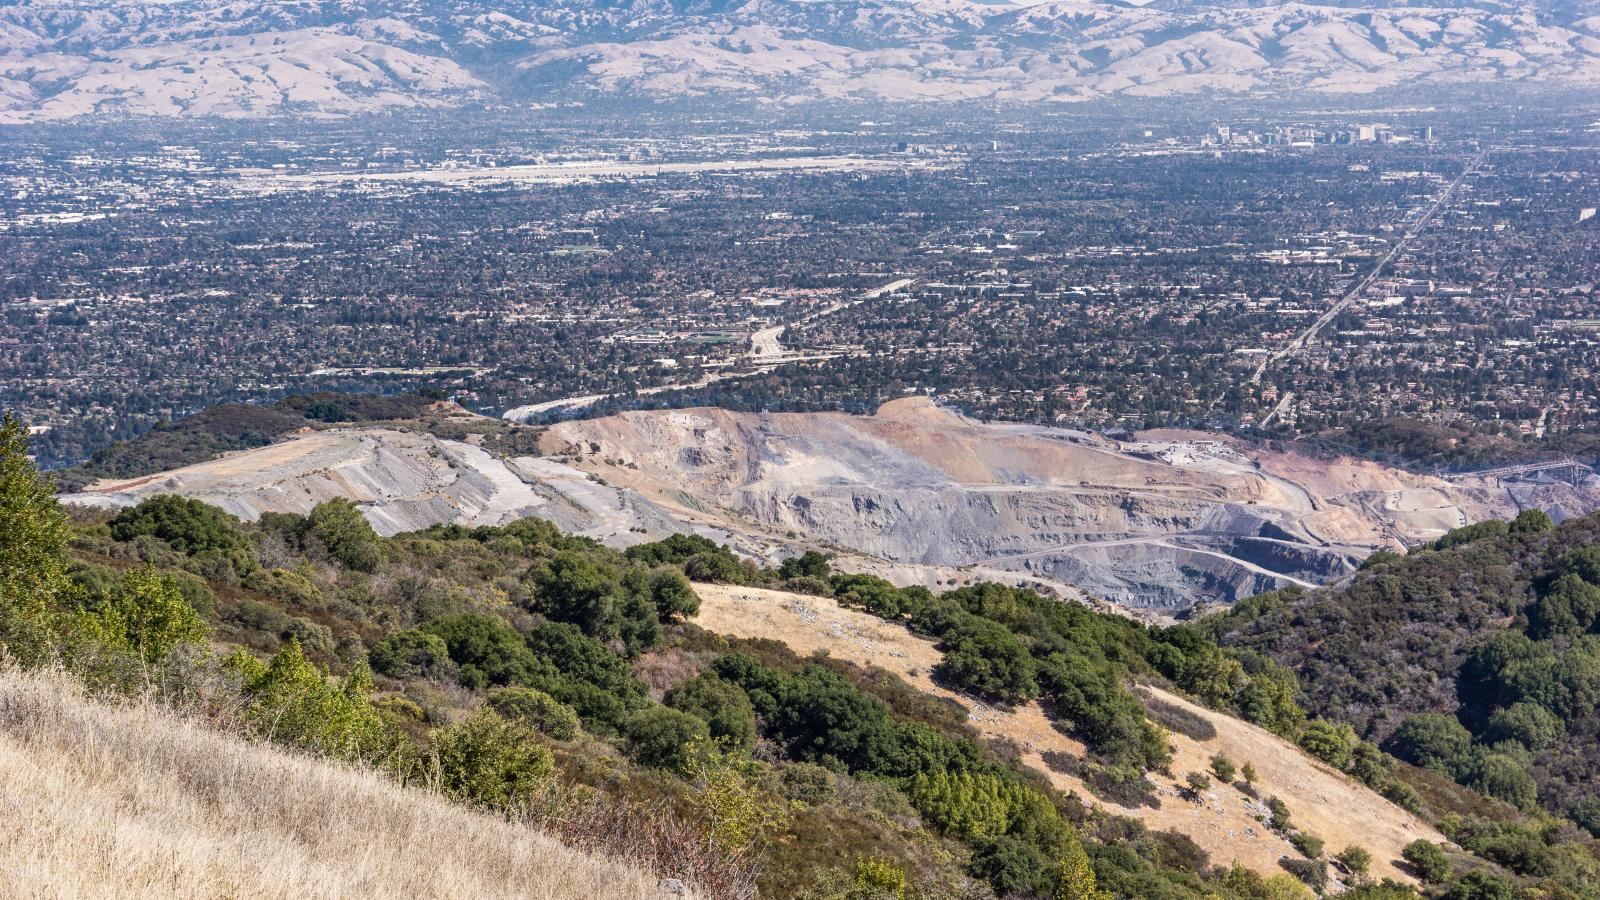 Photo of Lehigh Quarry and Cement Plant taken from Monte Bello Preserve (Karl Gohl)